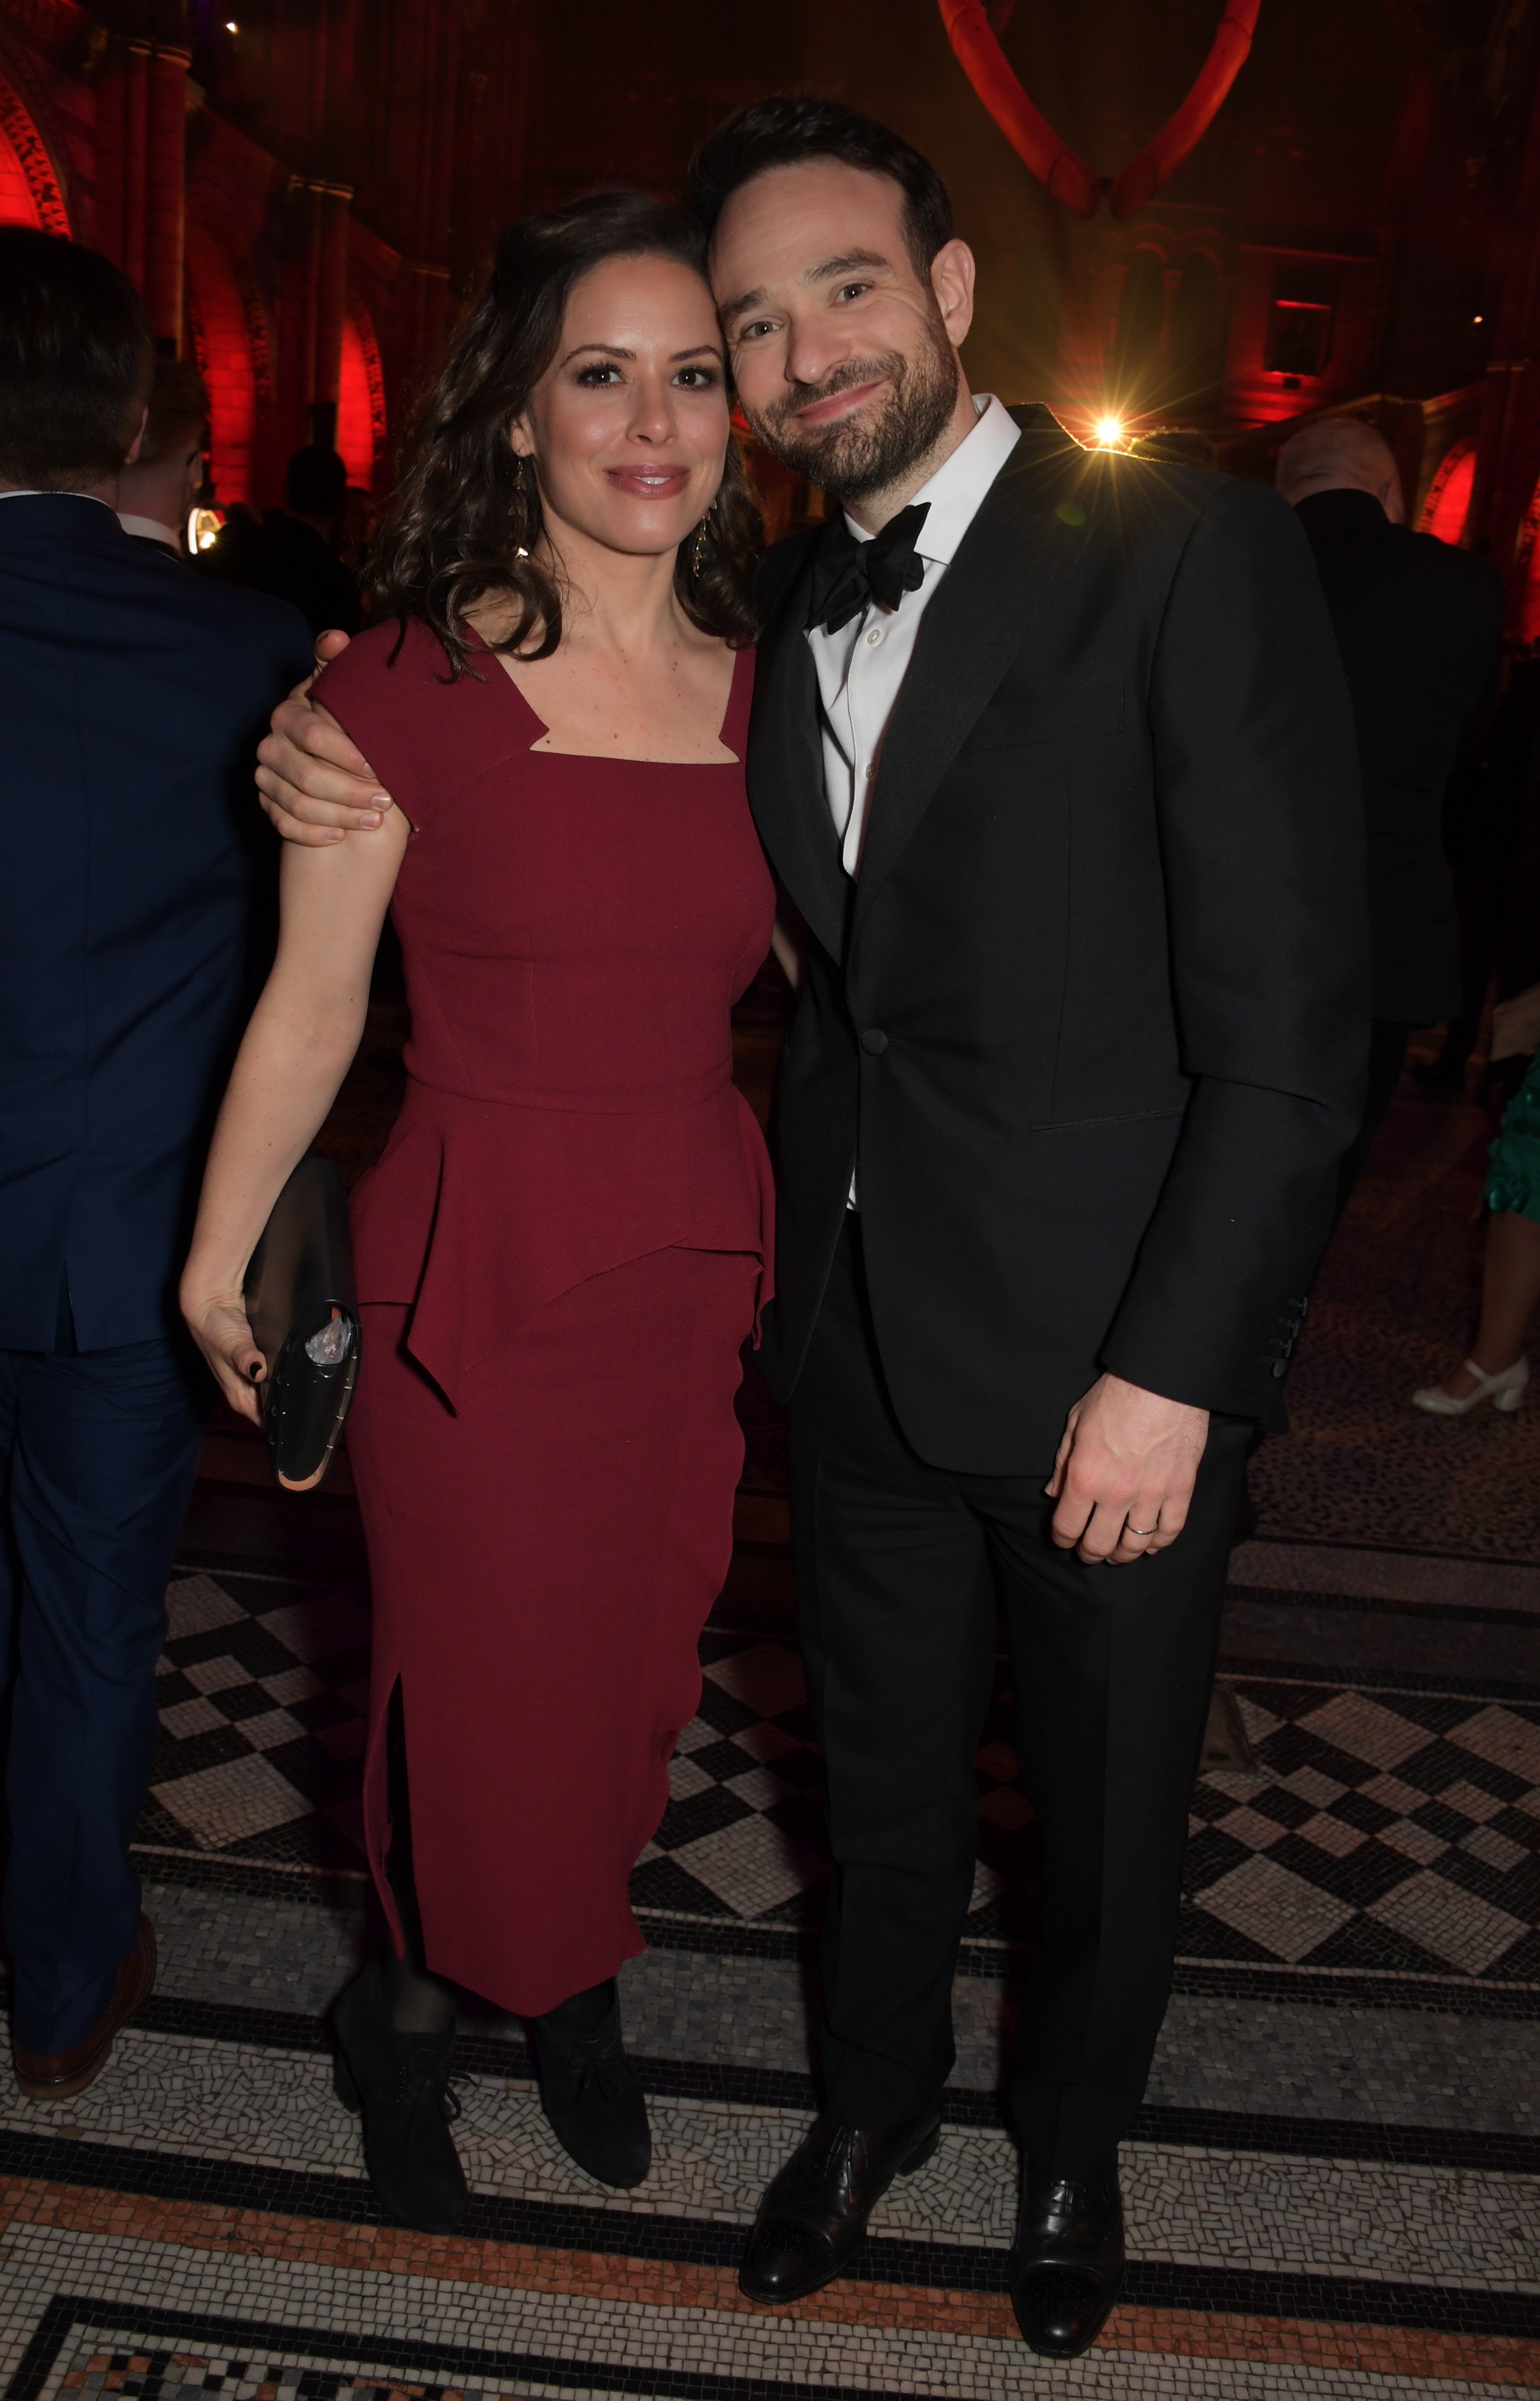 Samantha Thomas and Charlie Cox at the 2019 Olivier Awards after party on April 7, 2019. | Source: Getty Images